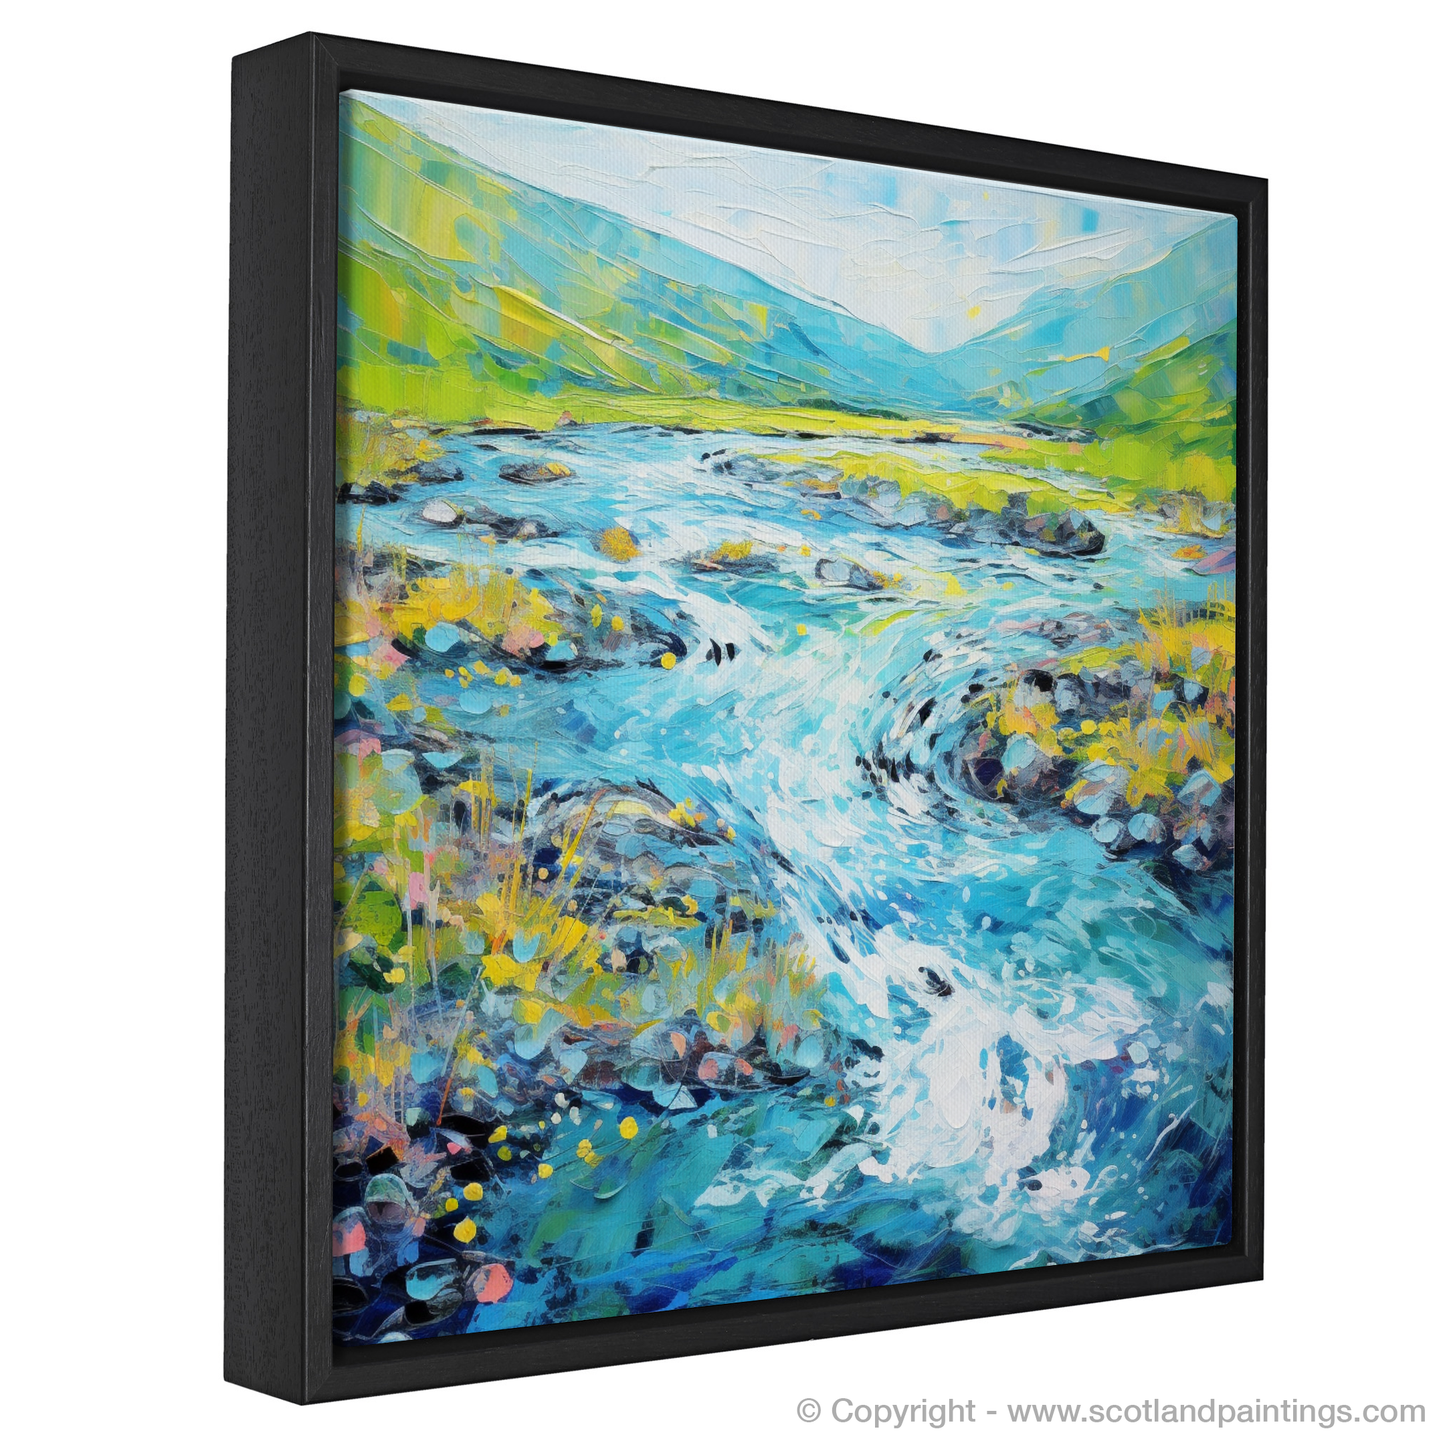 Painting and Art Print of River Etive, Argyll and Bute in summer entitled "Summer Rush of River Etive: An Abstract Highland Symphony".